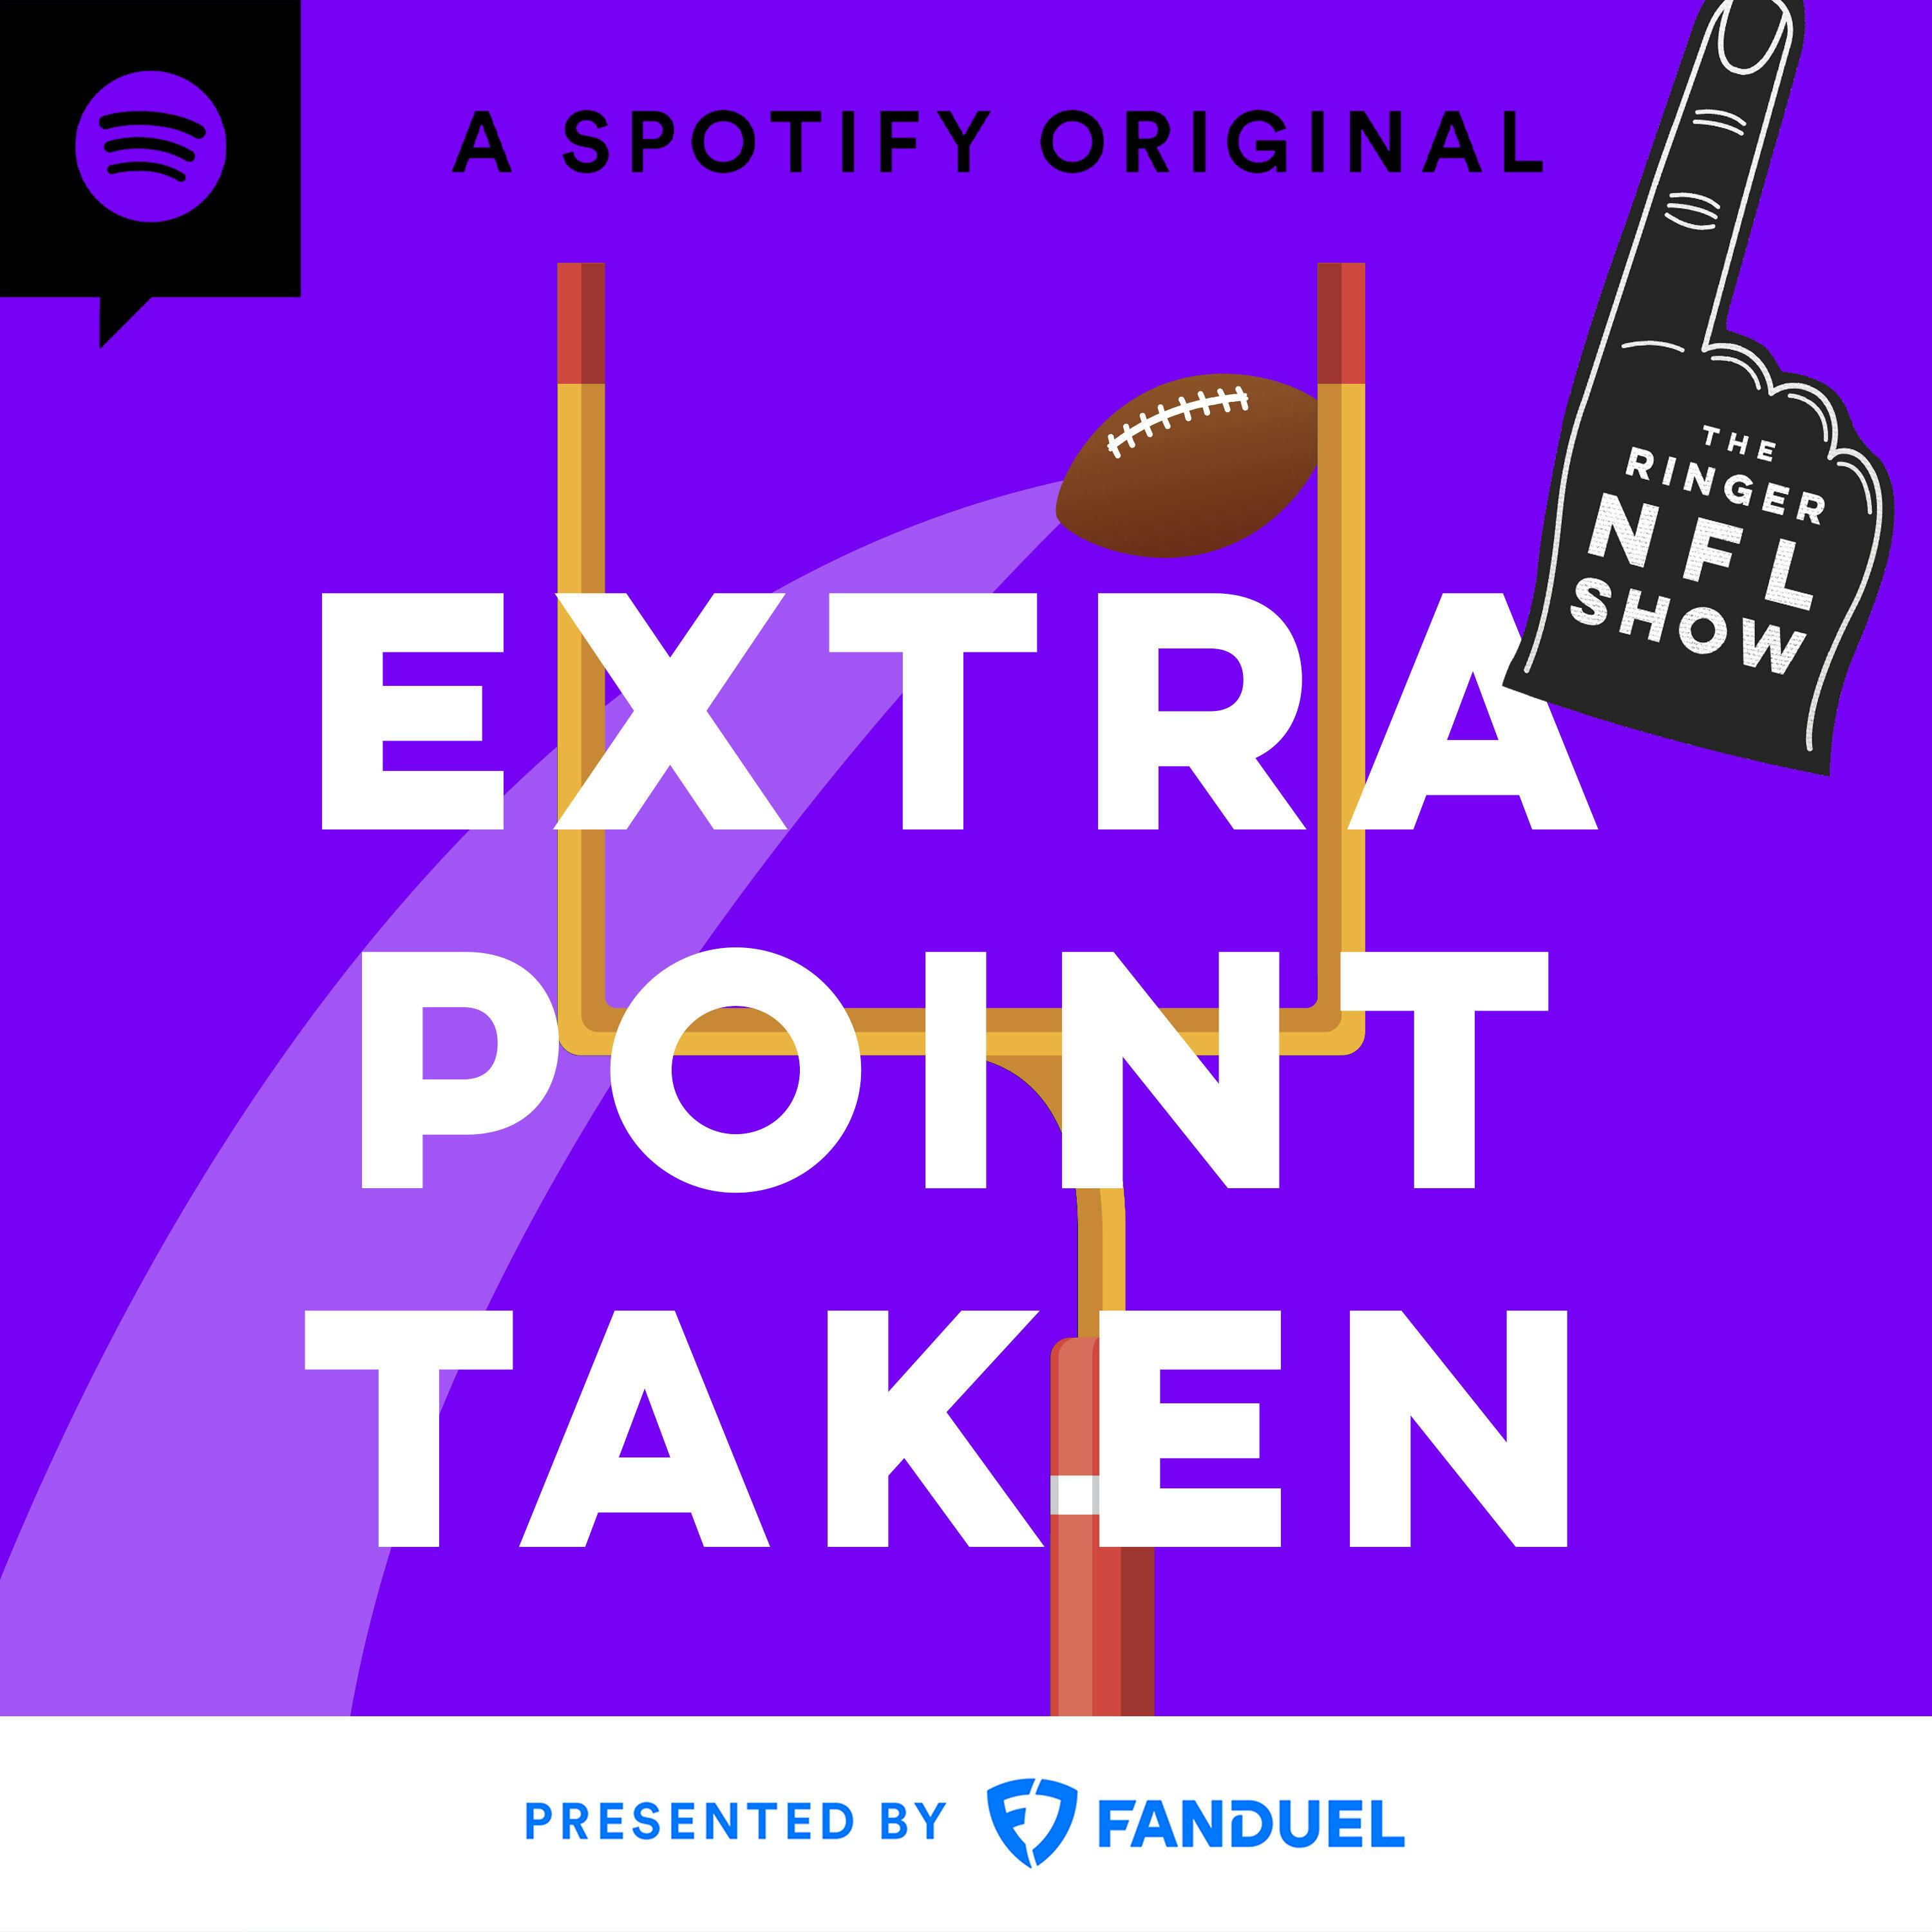 The Browns Can’t Win Without Nick Chubb, the Ravens' Coordinators are Building a Contender, and More Big Takeaways from Week 2 | Extra Point Taken